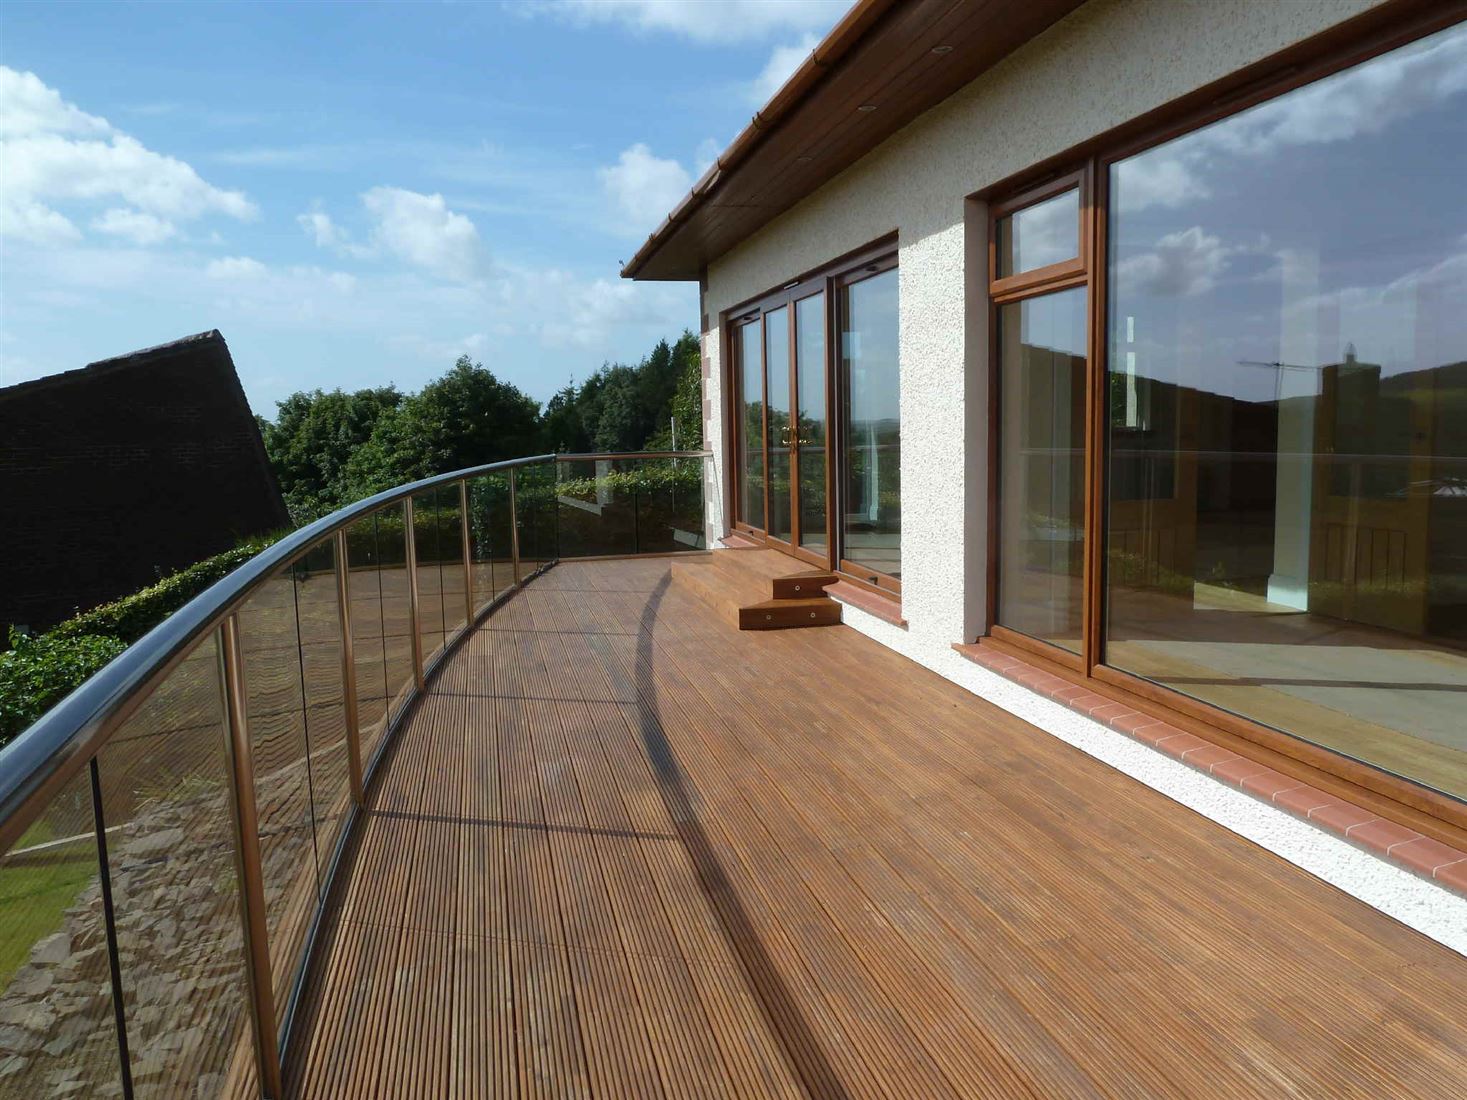 Large curved Royal Chrome Orbit Glass Balustrade overlooking the countryside